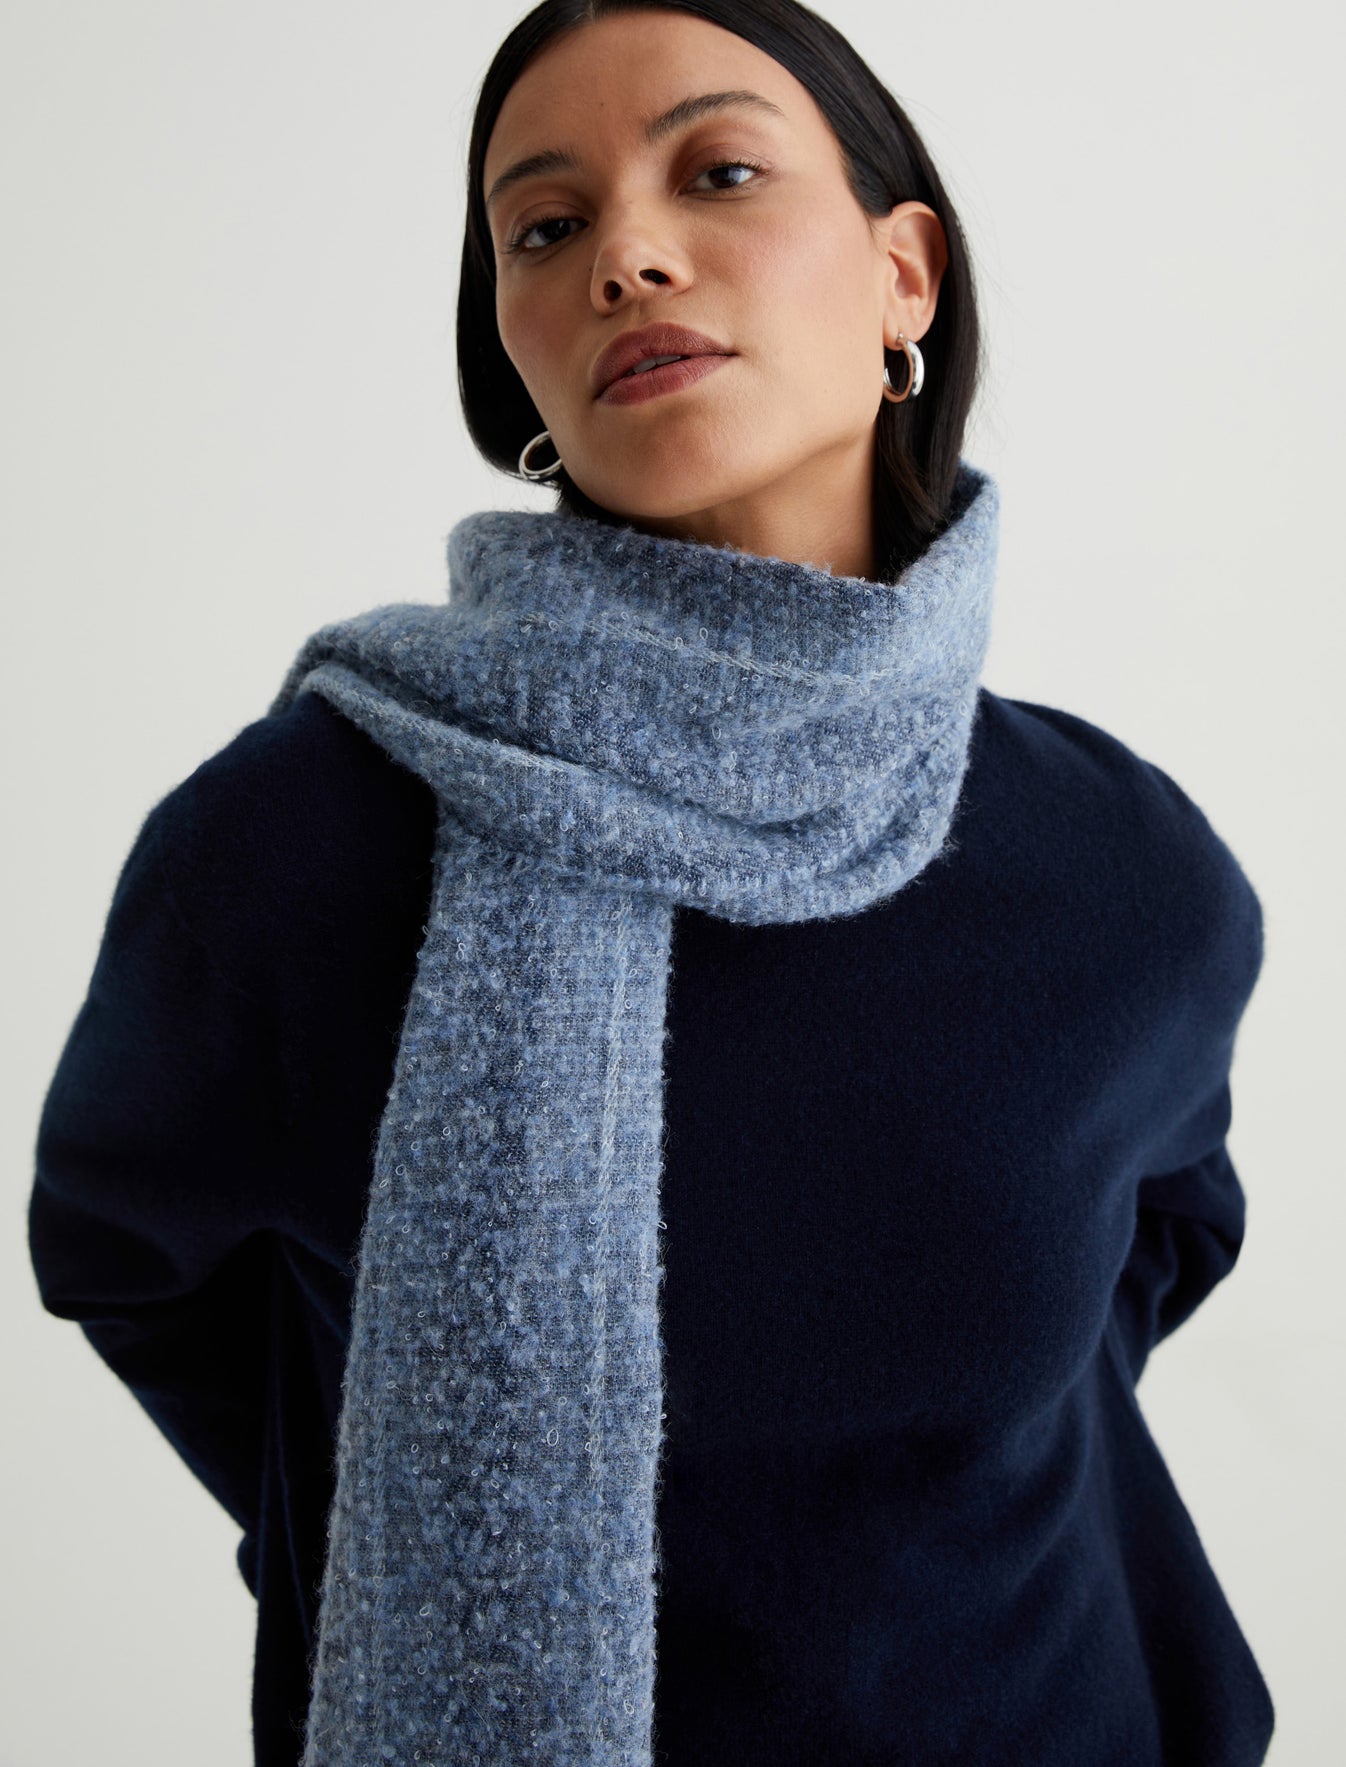 Accessory Arden Scarf Indigo Wool Stripe at AG Jeans Official Store